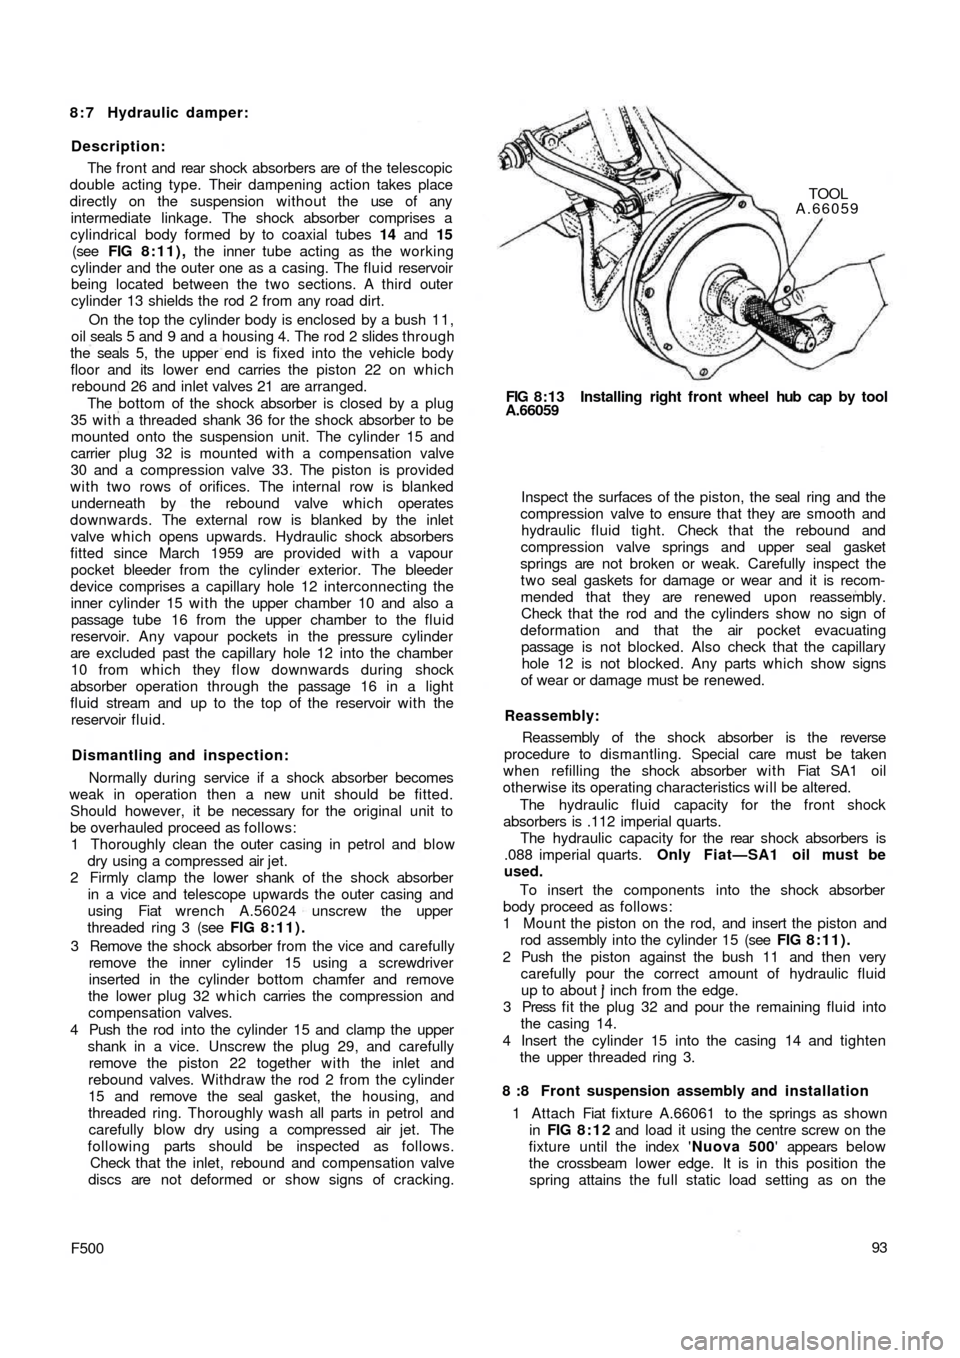 FIAT 500 1973 1.G Workshop Manual 8 : 7 Hydraulic damper:
Description:
The front and rear  shock absorbers are of the telescopic
double acting type. Their dampening action takes place
directly on the suspension without the use of any
